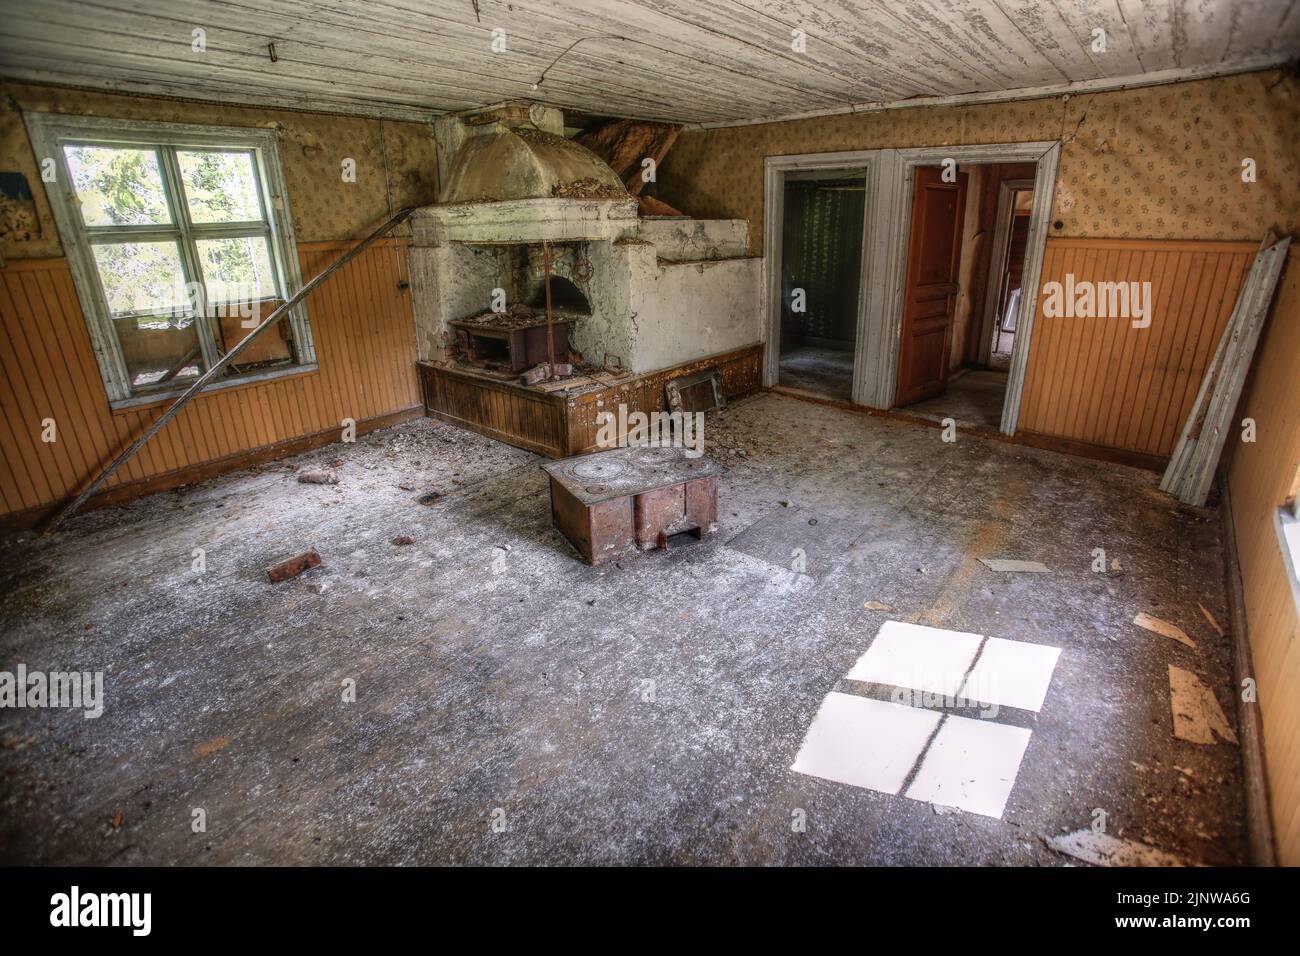 Ruined interior of an old wooden house with rusty stoves. Stock Photo